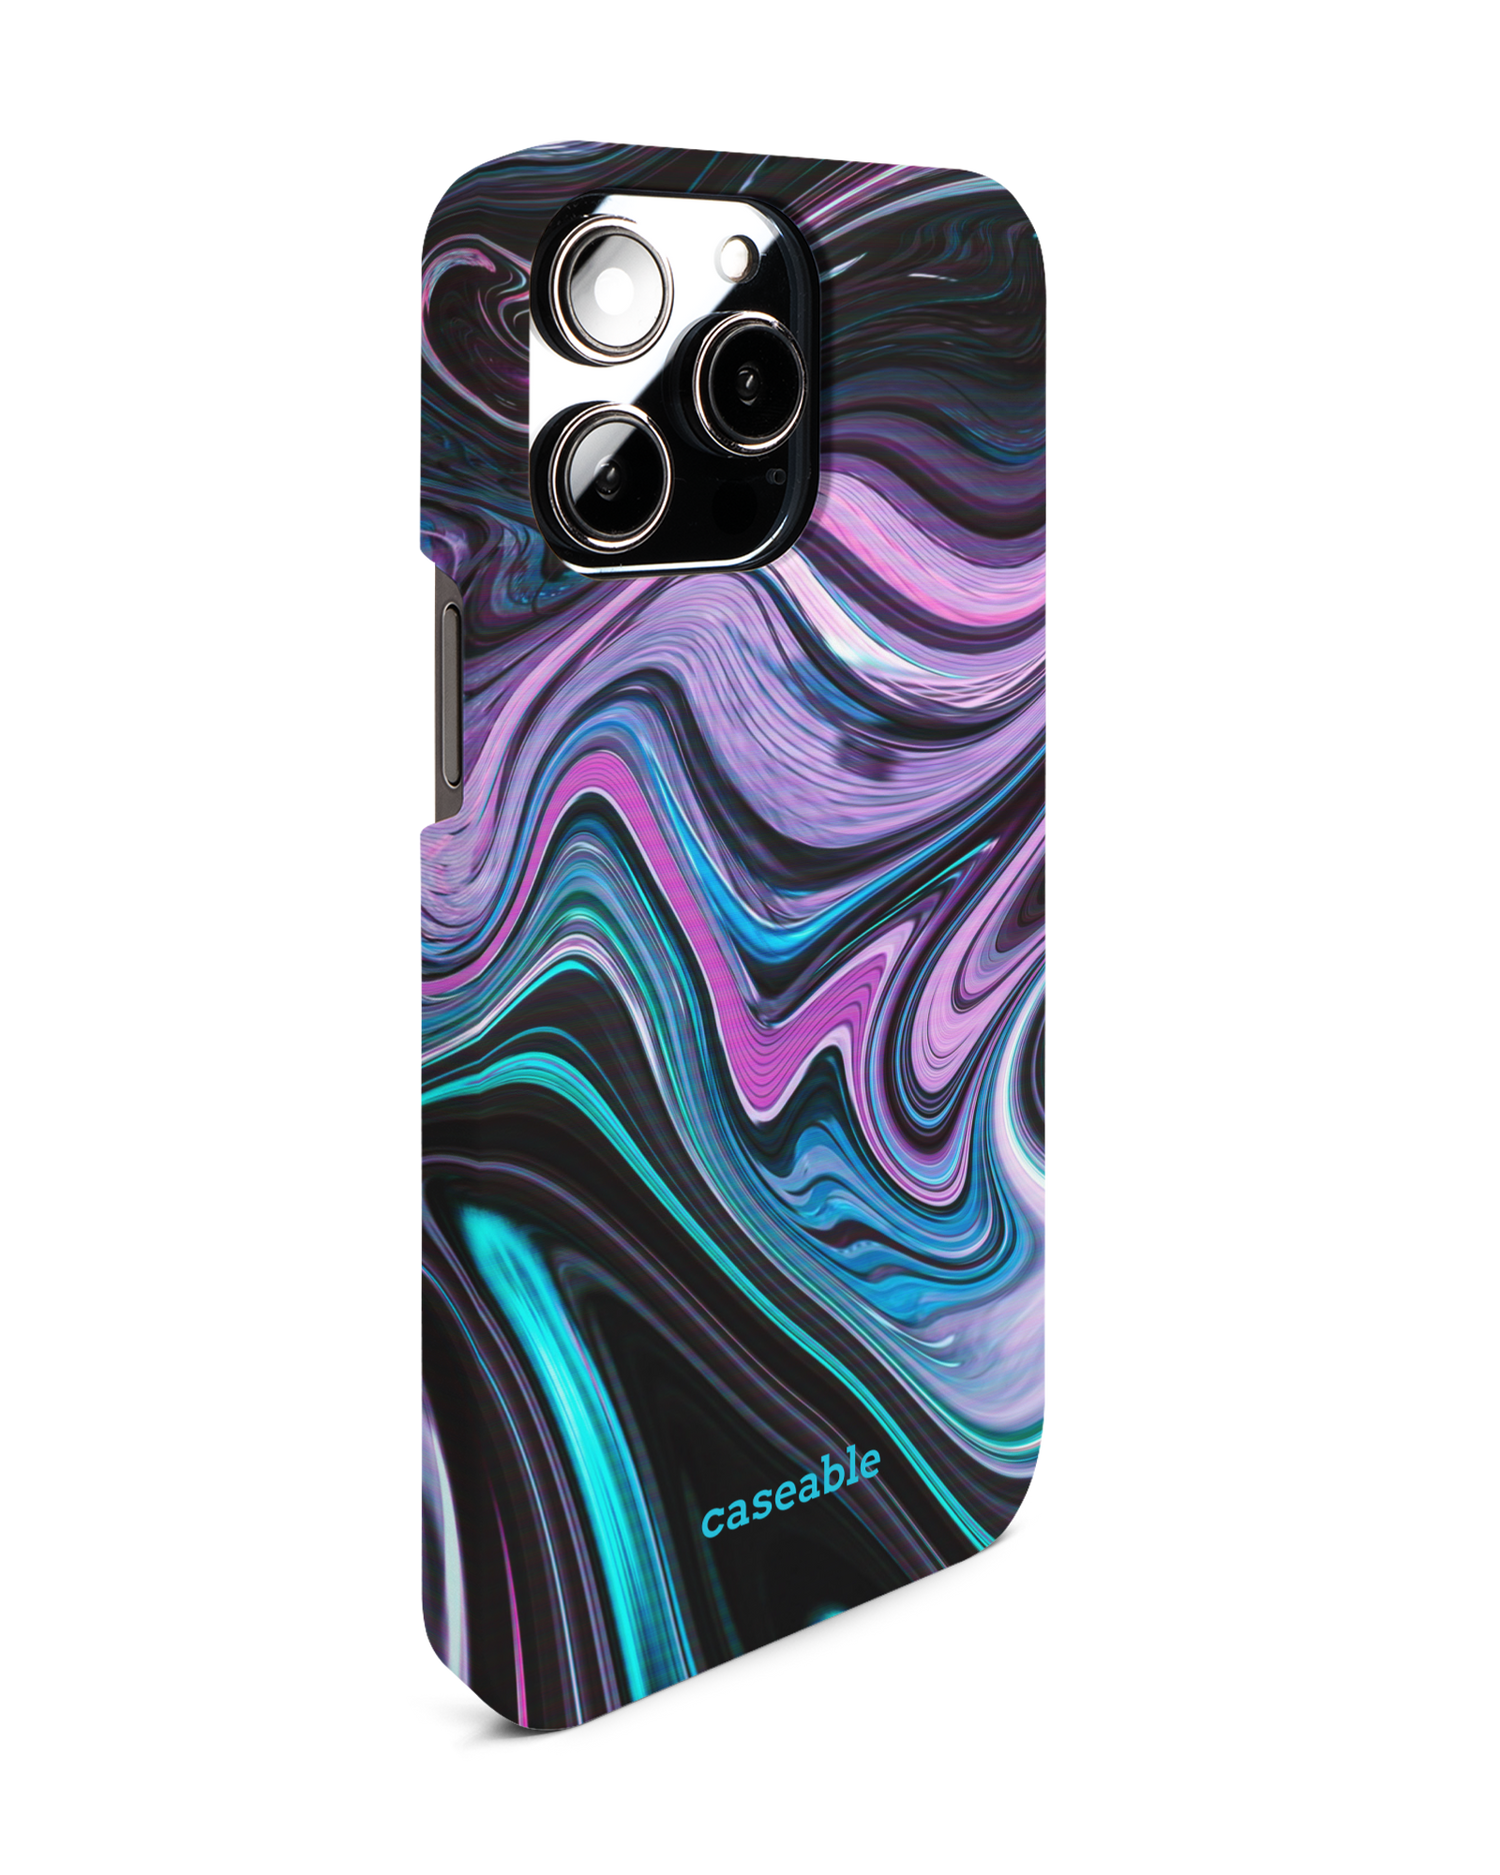 Digital Swirl Hard Shell Phone Case for Apple iPhone 14 Pro Max: View from the left side